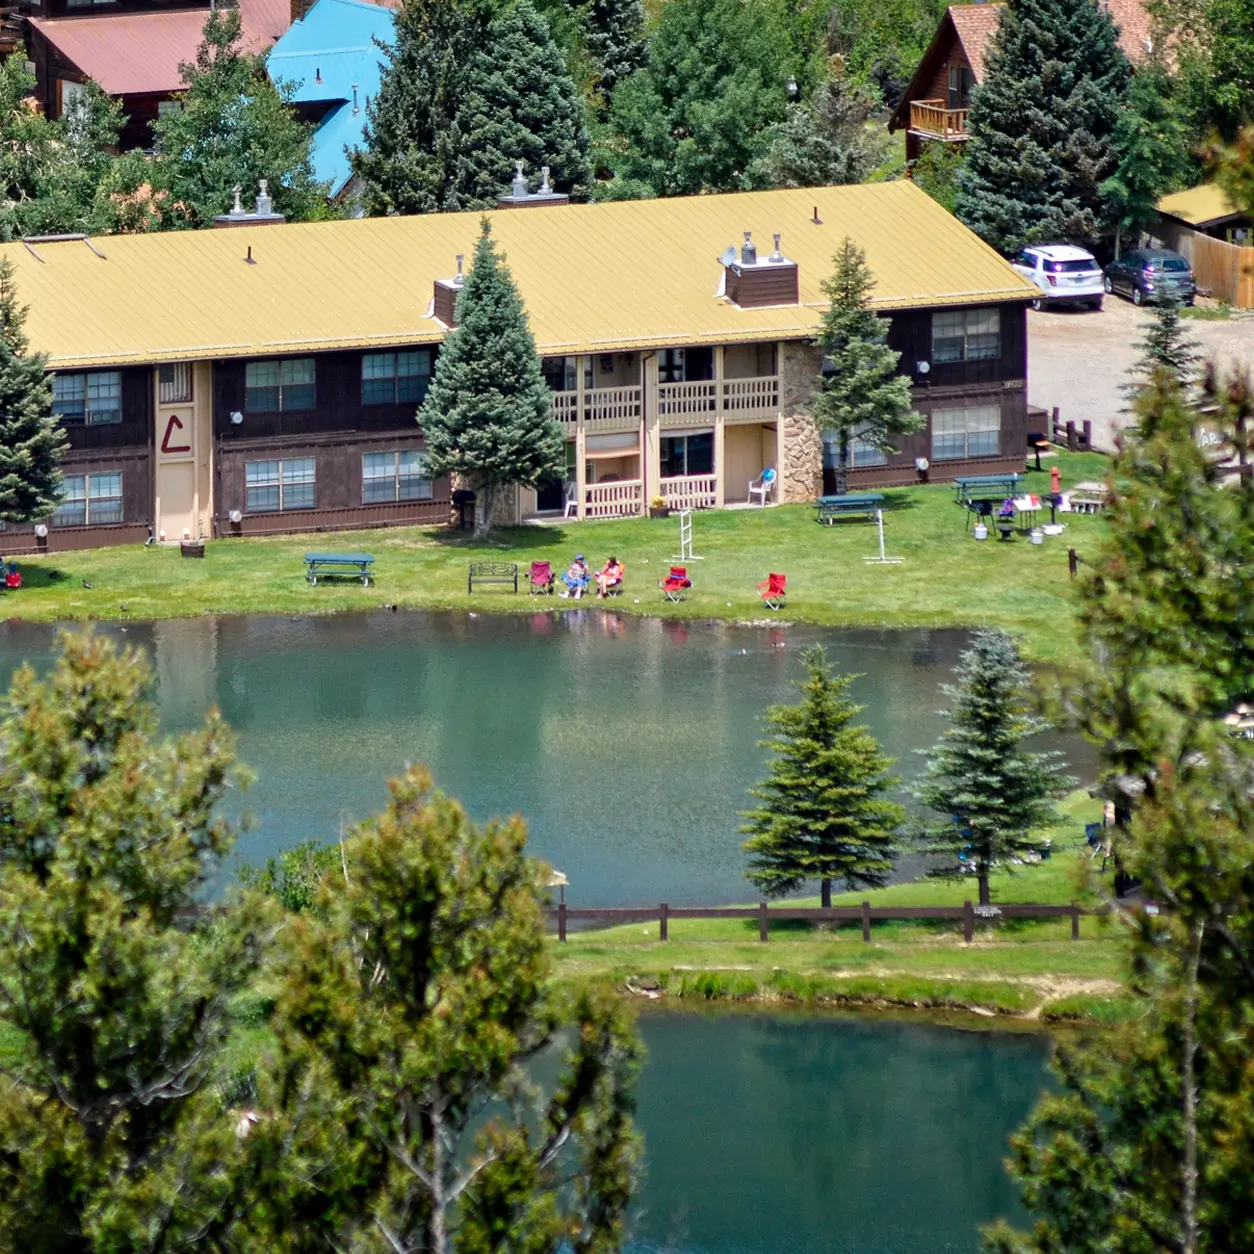 Caribel Condominiums, seen from above and through pine trees